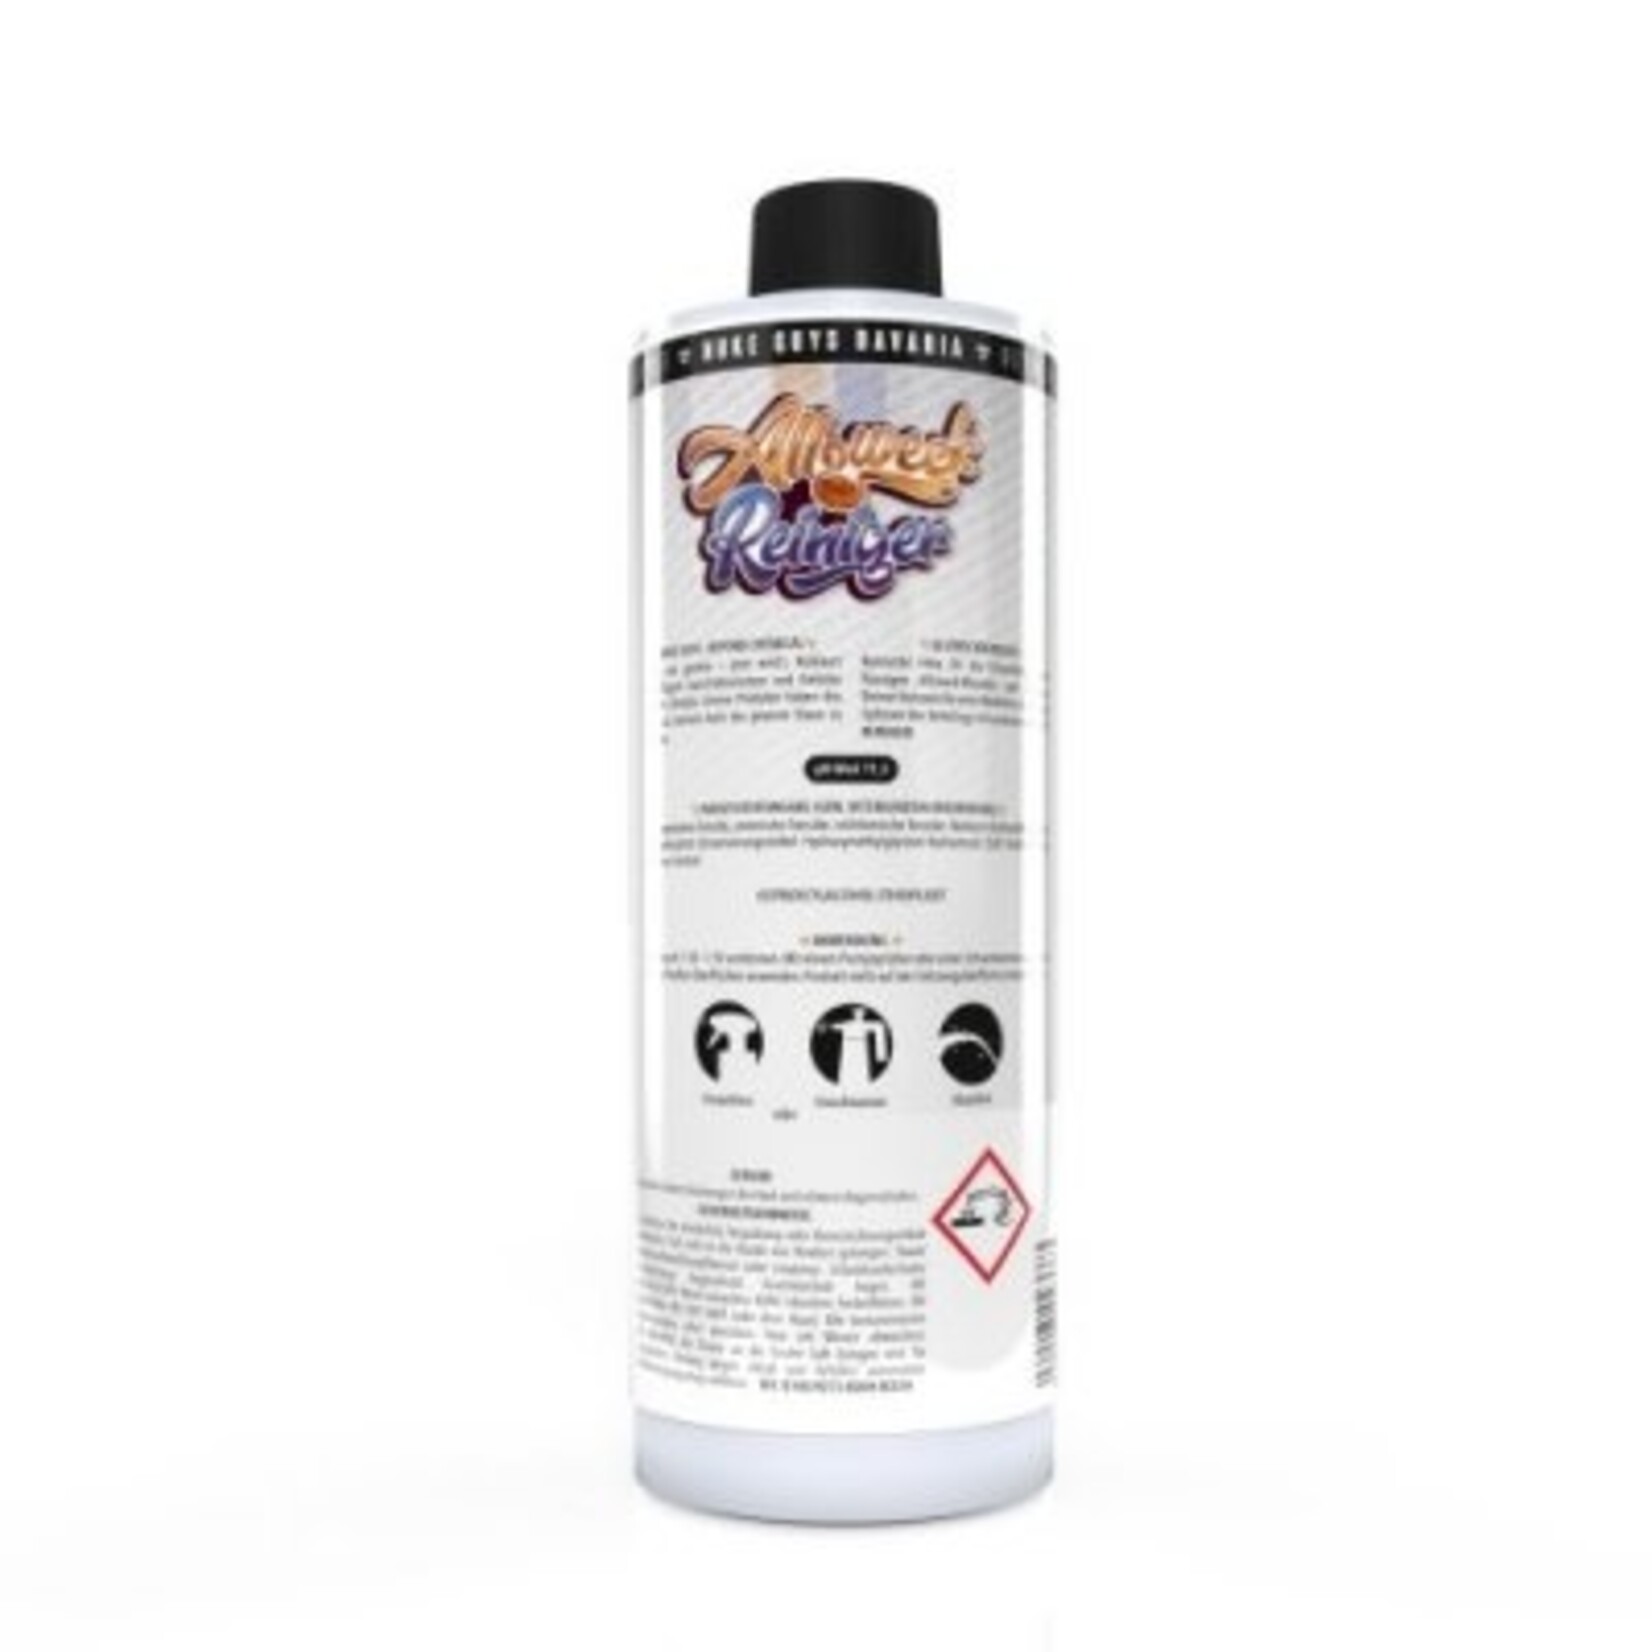 Nuke Guys All Purpose Cleaner - Sons of Detail